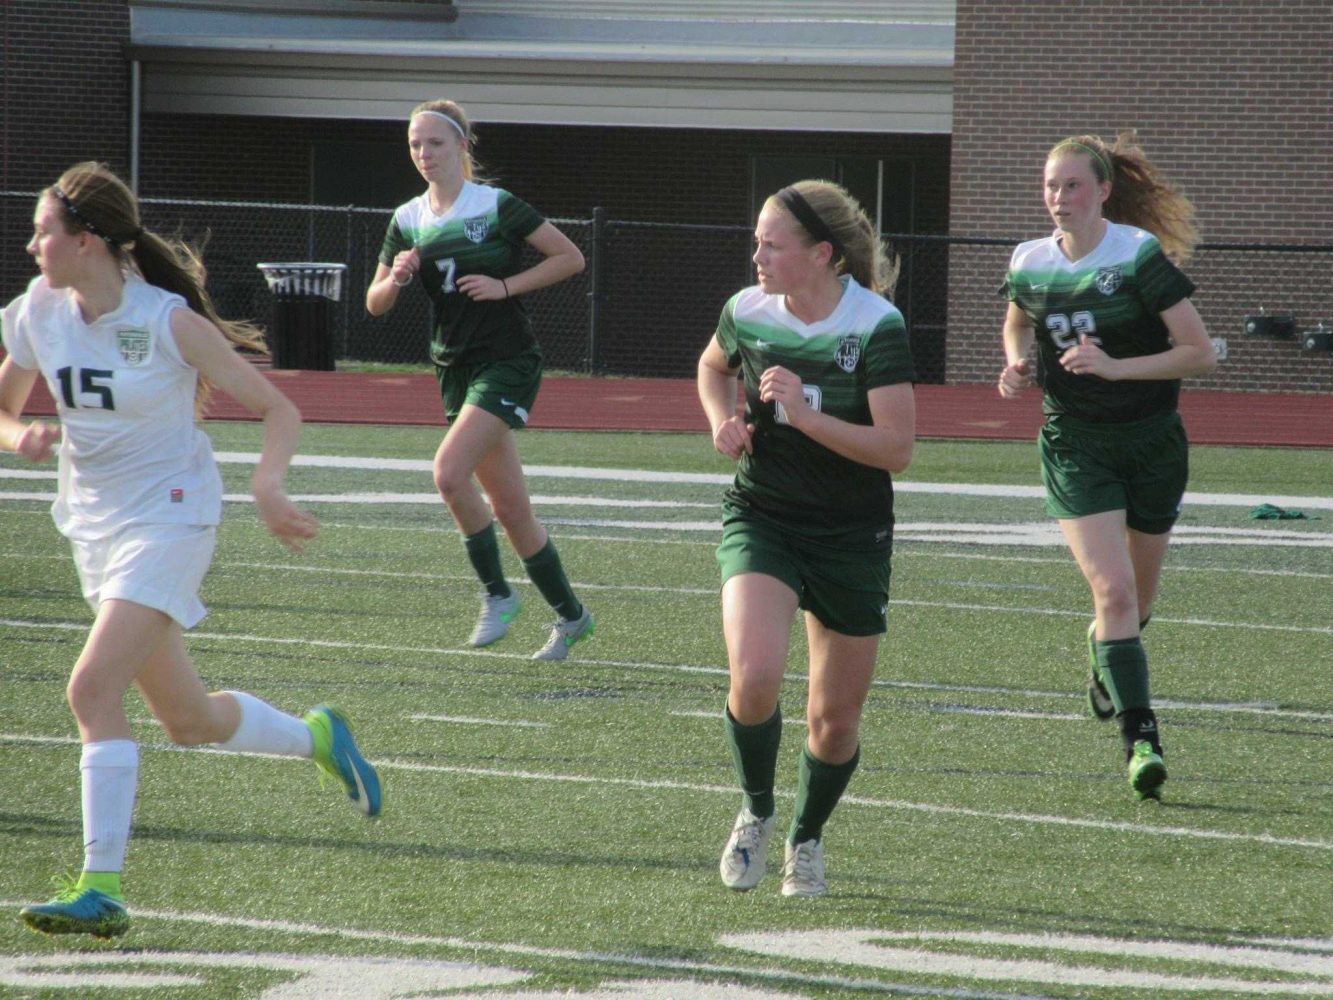 McGehee (back right) runs up the field with fellow teammates Bailey Schaefermeier (center) and Kayla Meyer (back left)